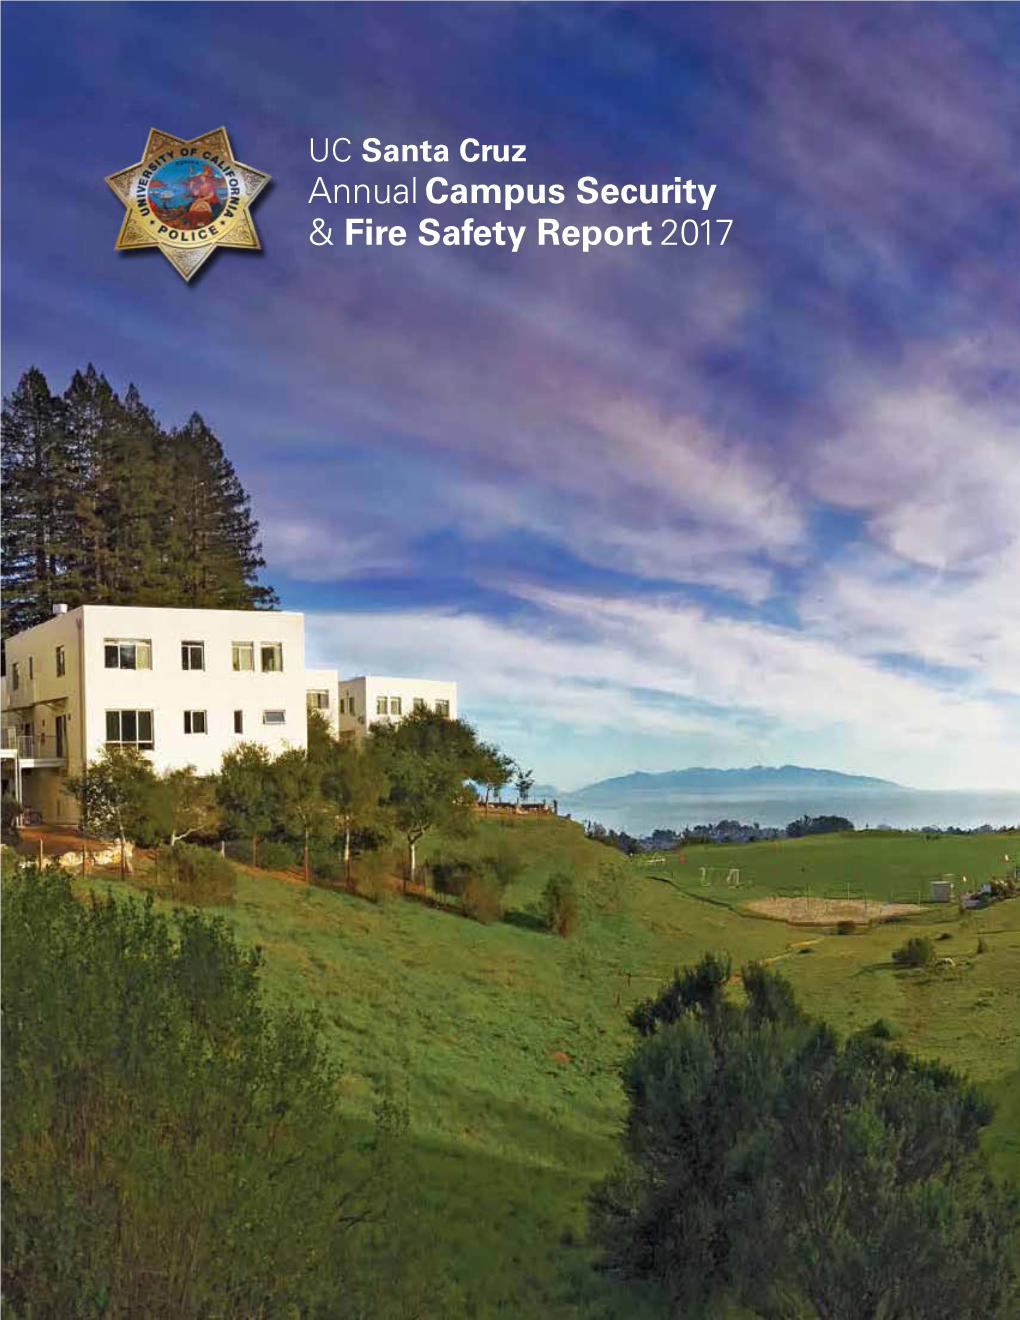 Annual Campus Security & Fire Safety Report 2017